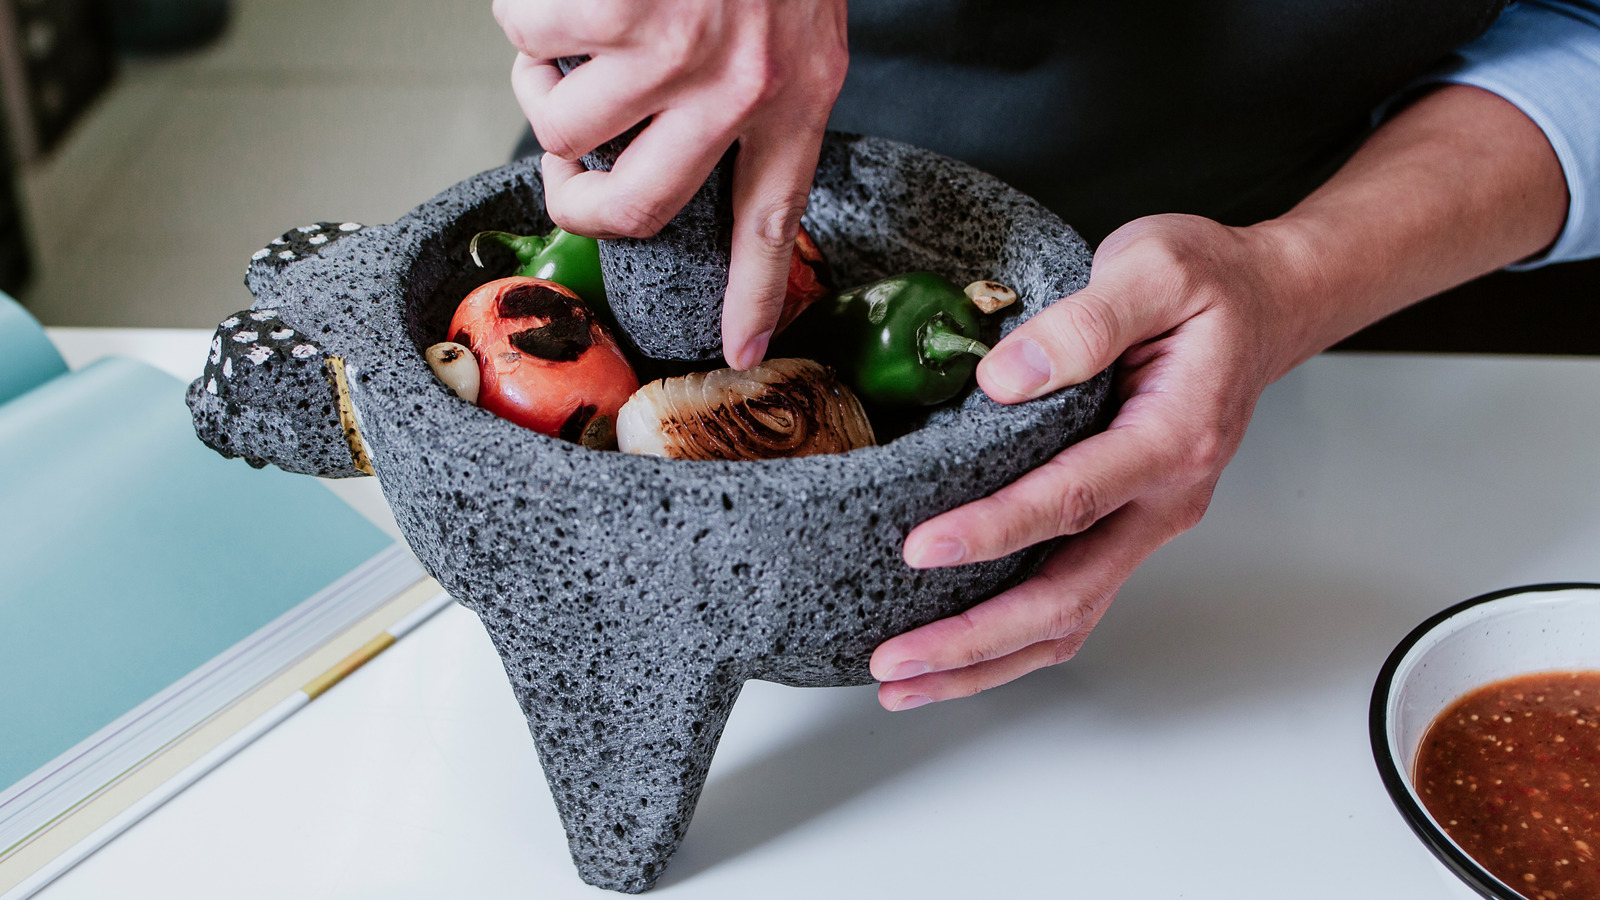 https://www.tastingtable.com/img/gallery/mortar-and-pestle-vs-molcajete-whats-the-difference/l-intro-1672084171.jpg